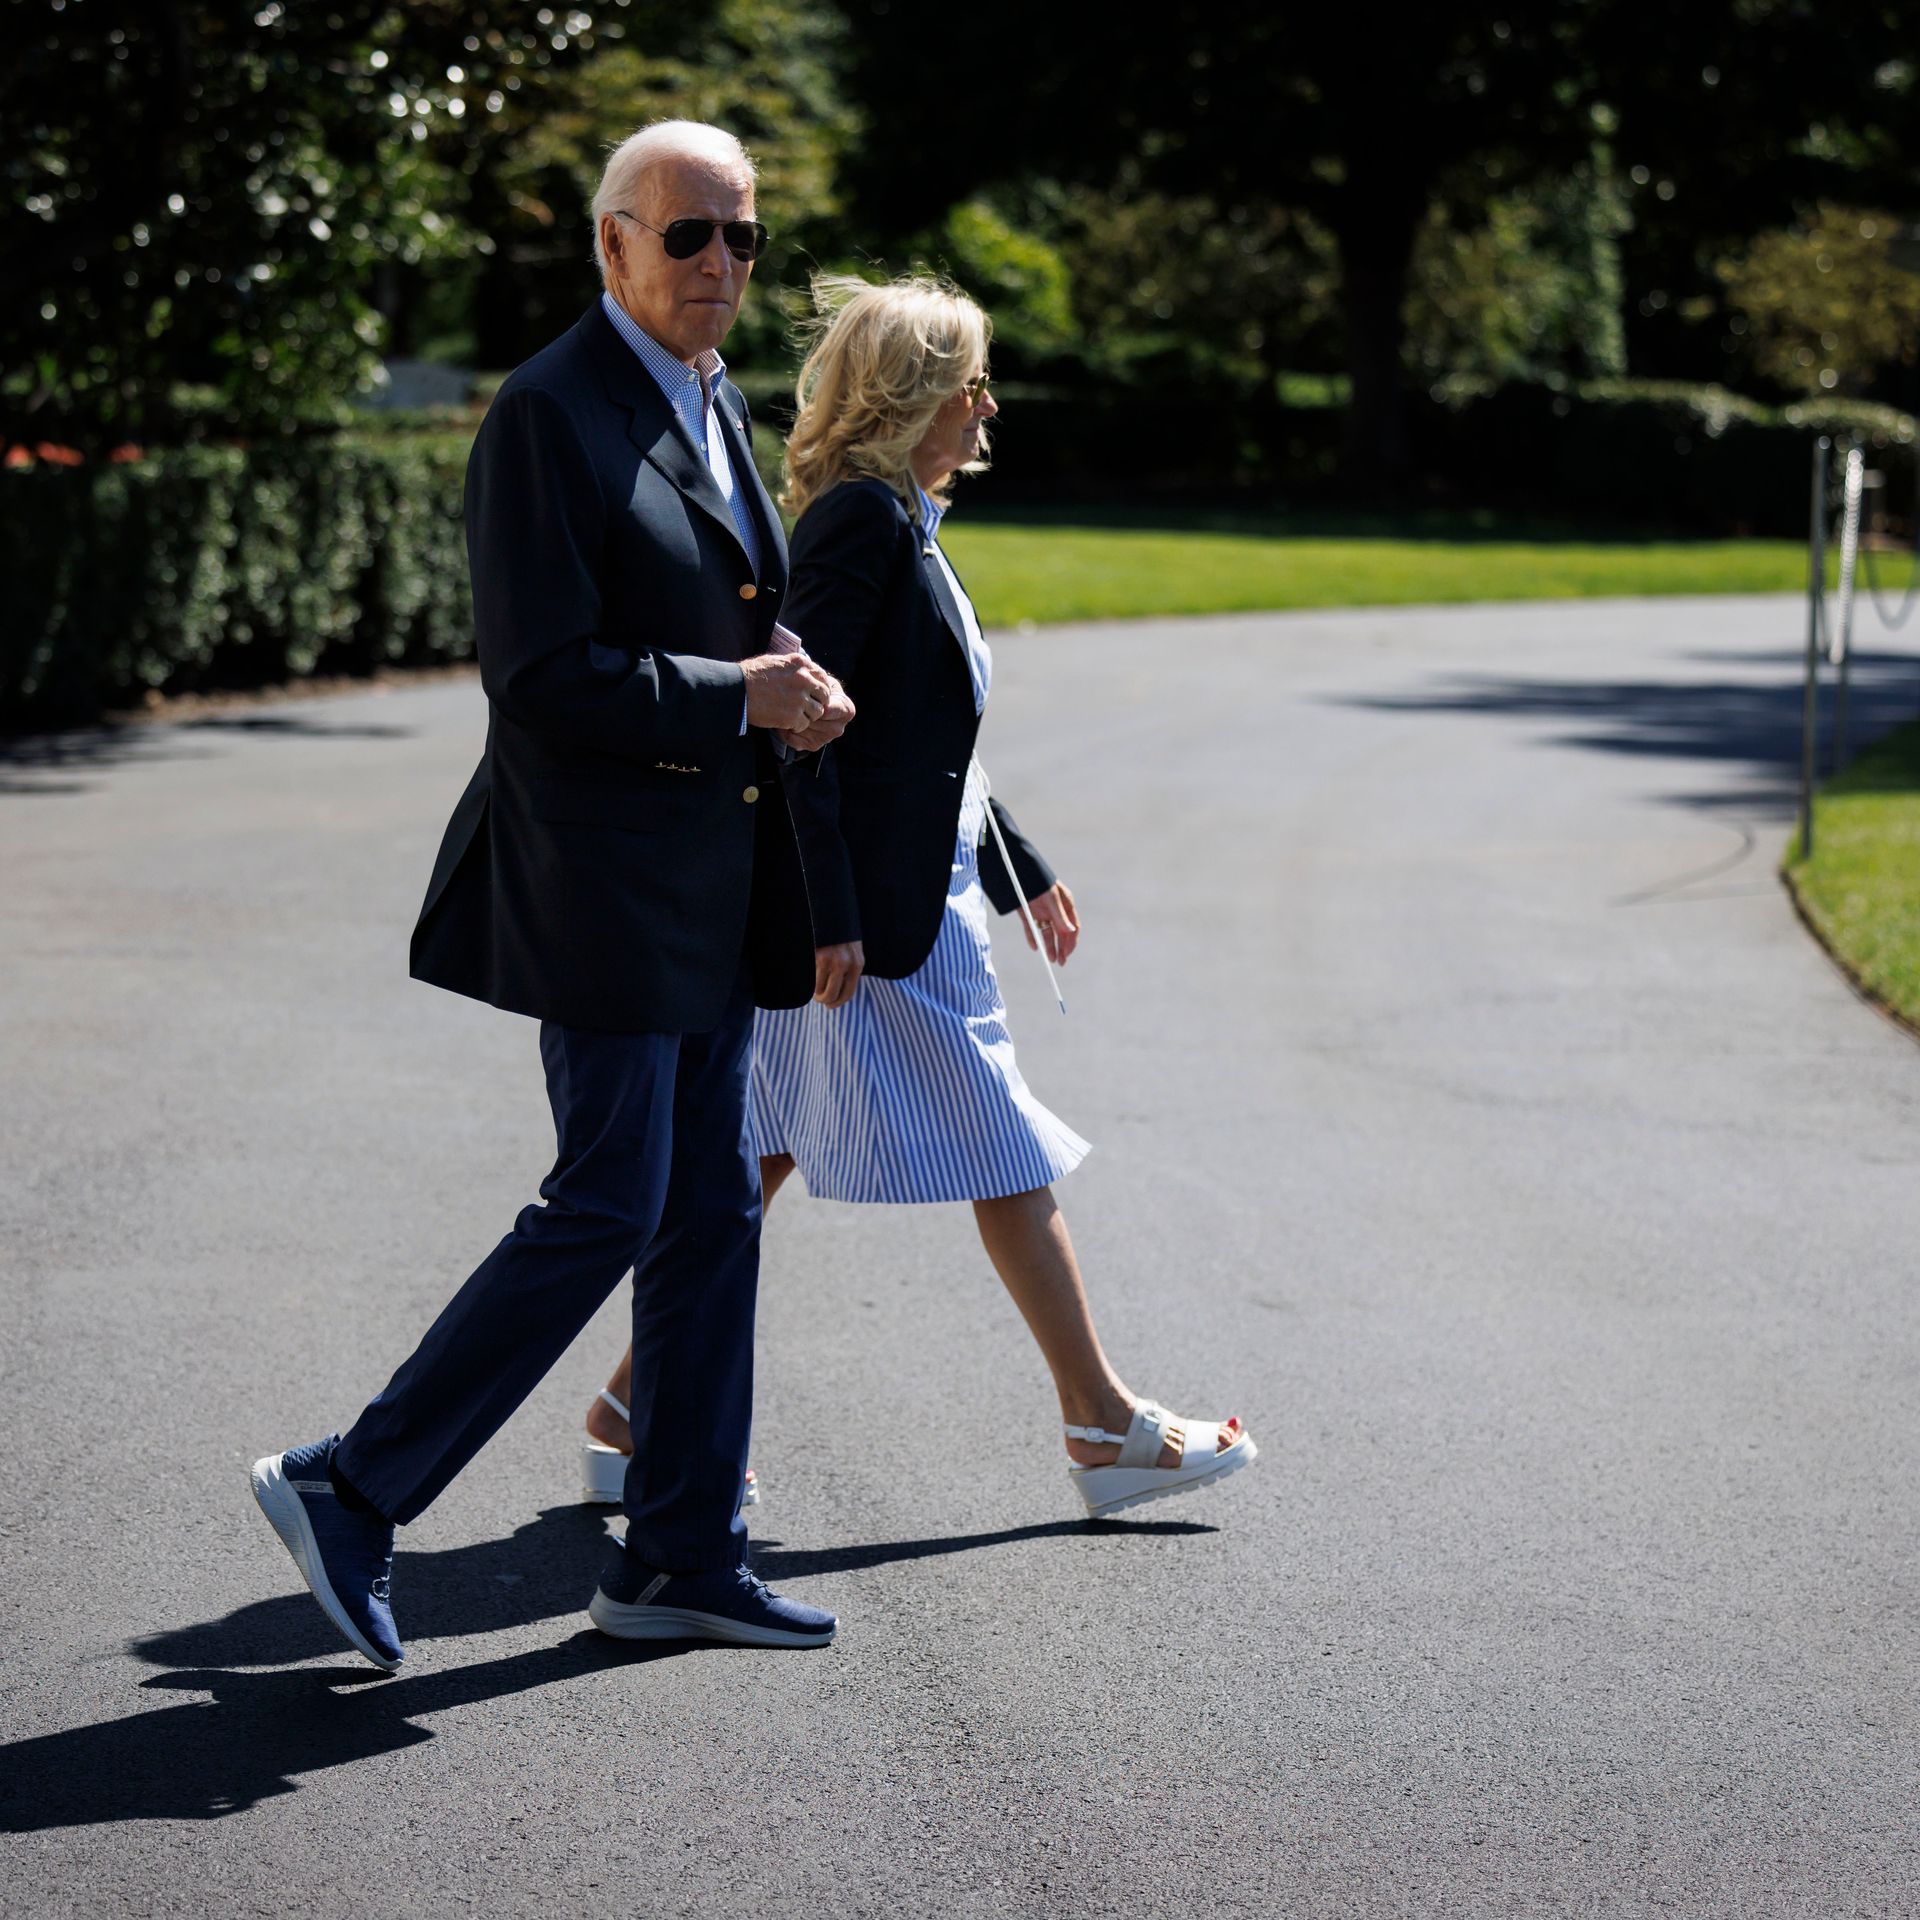 Why Biden is now routinely taking the short stairs up to Air Force